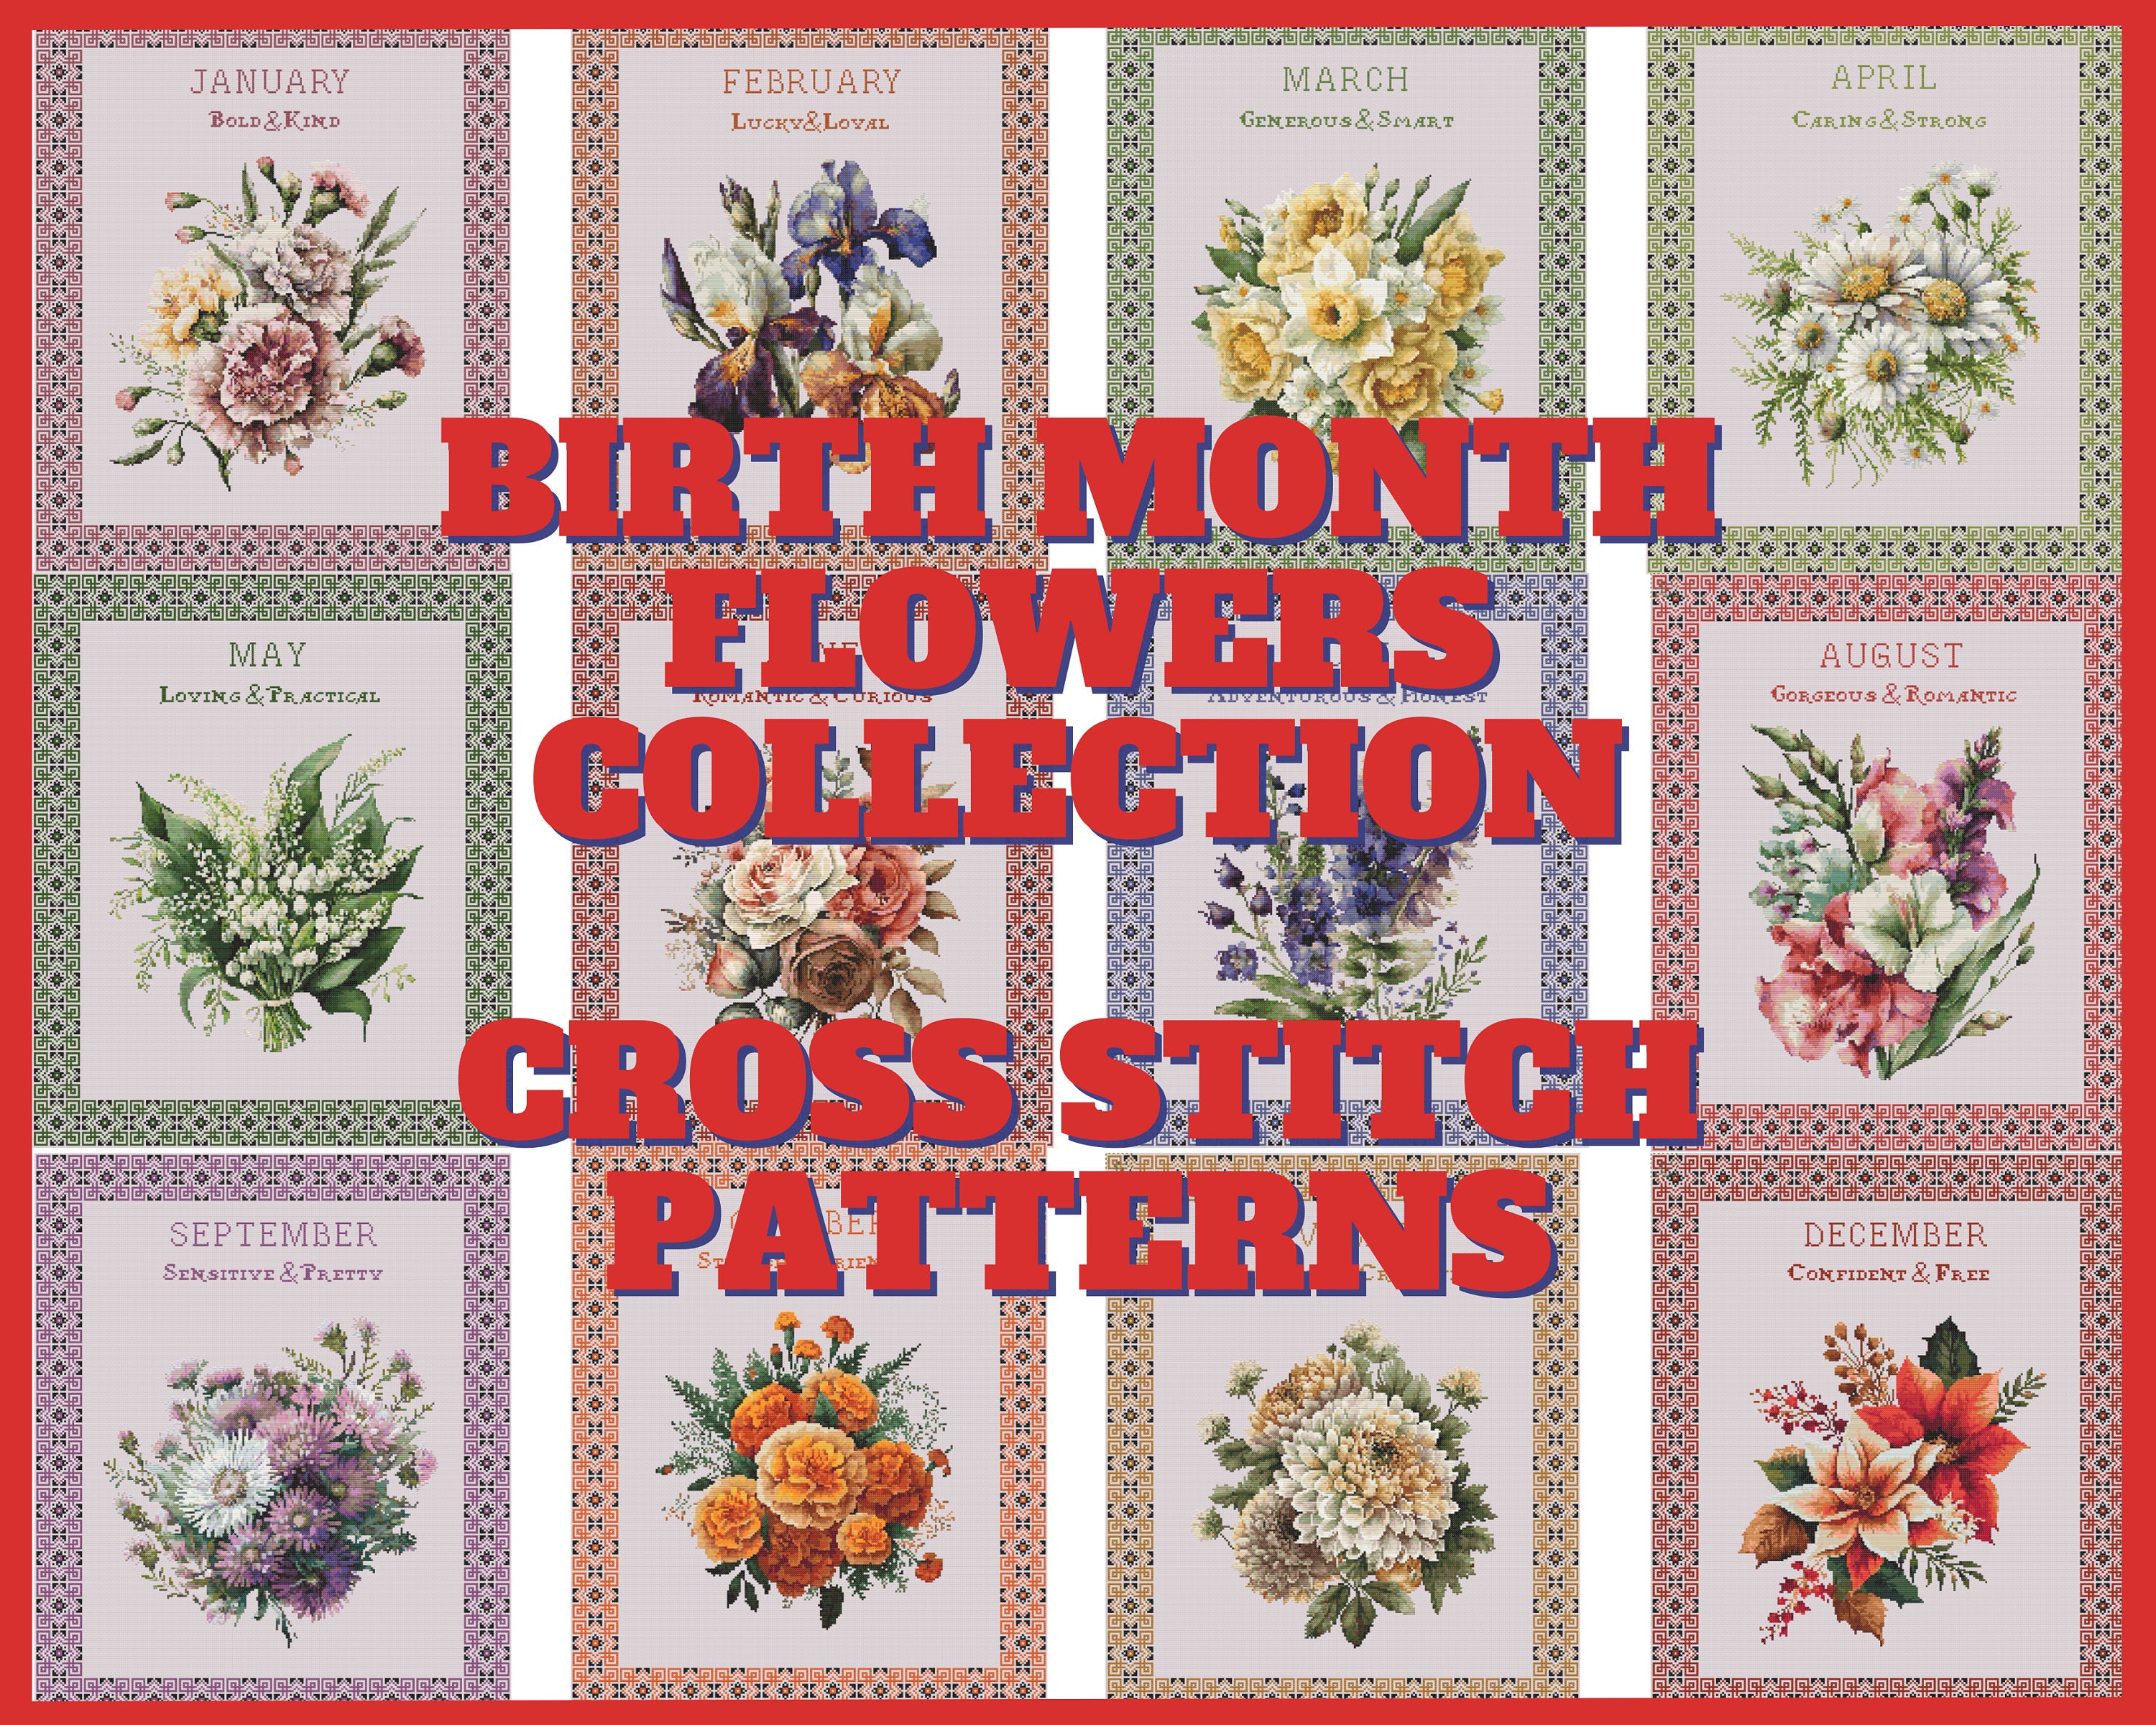 Cross Stitch Flower of the Month: August by Just CrossStitch